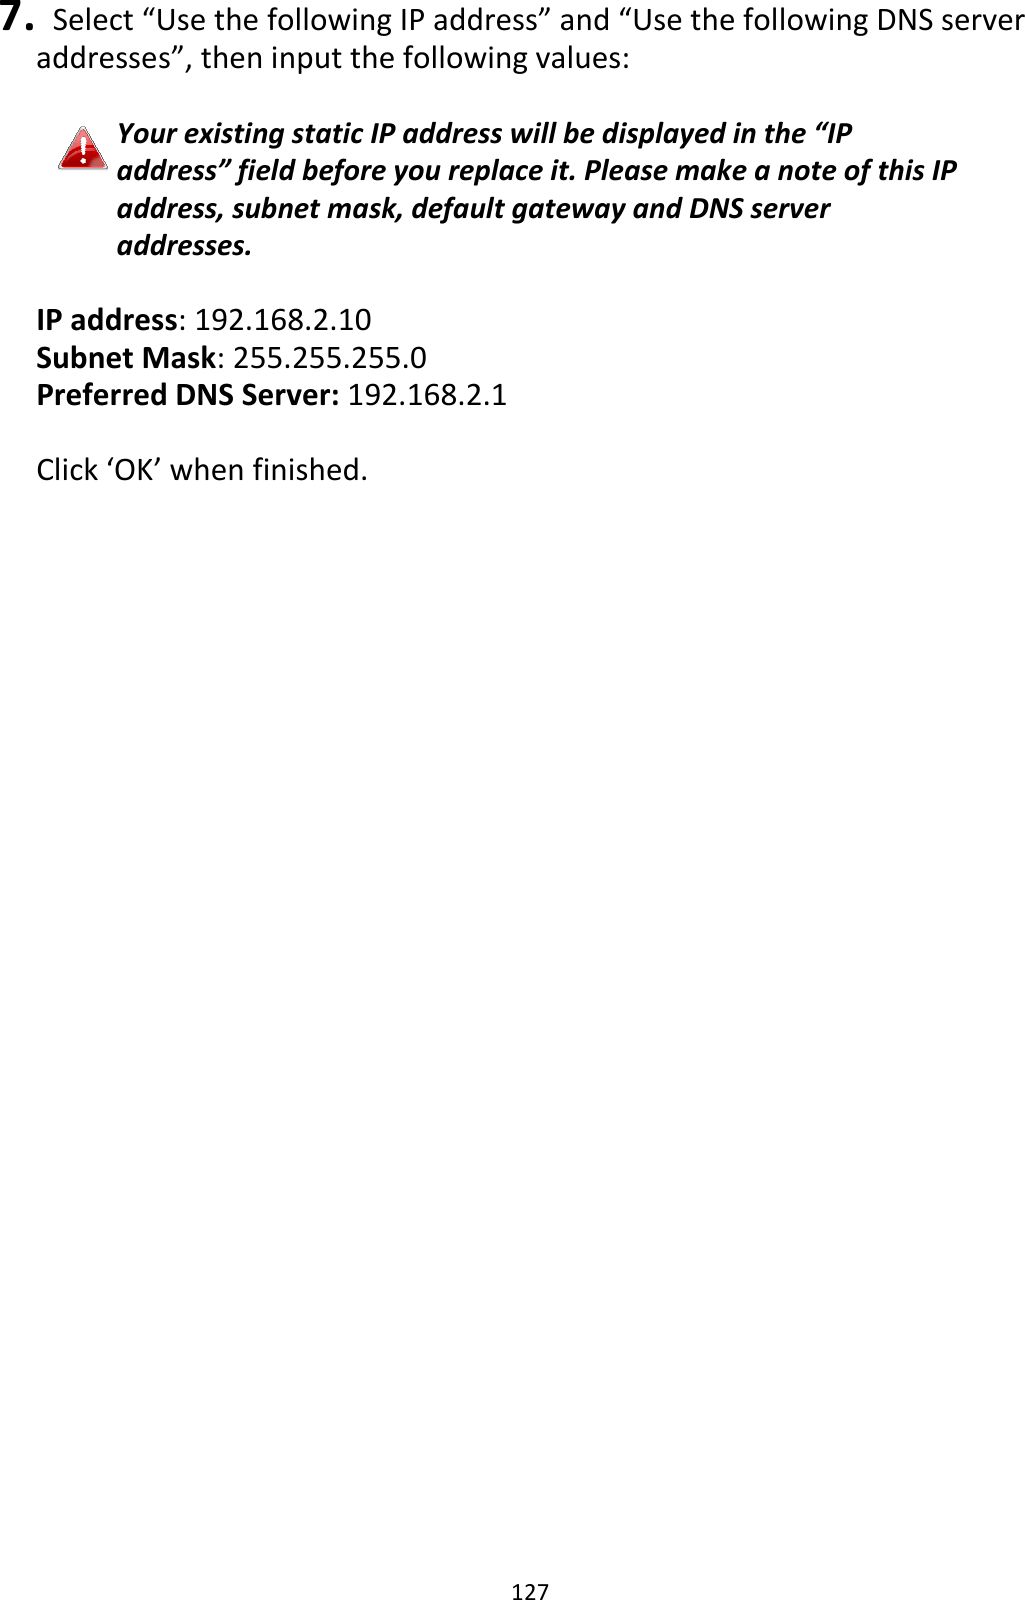 127 7.   Select “Use the following IP address” and “Use the following DNS server addresses”, then input the following values:  Your existing static IP address will be displayed in the “IP address” field before you replace it. Please make a note of this IP address, subnet mask, default gateway and DNS server addresses.  IP address: 192.168.2.10 Subnet Mask: 255.255.255.0 Preferred DNS Server: 192.168.2.1  Click ‘OK’ when finished.  